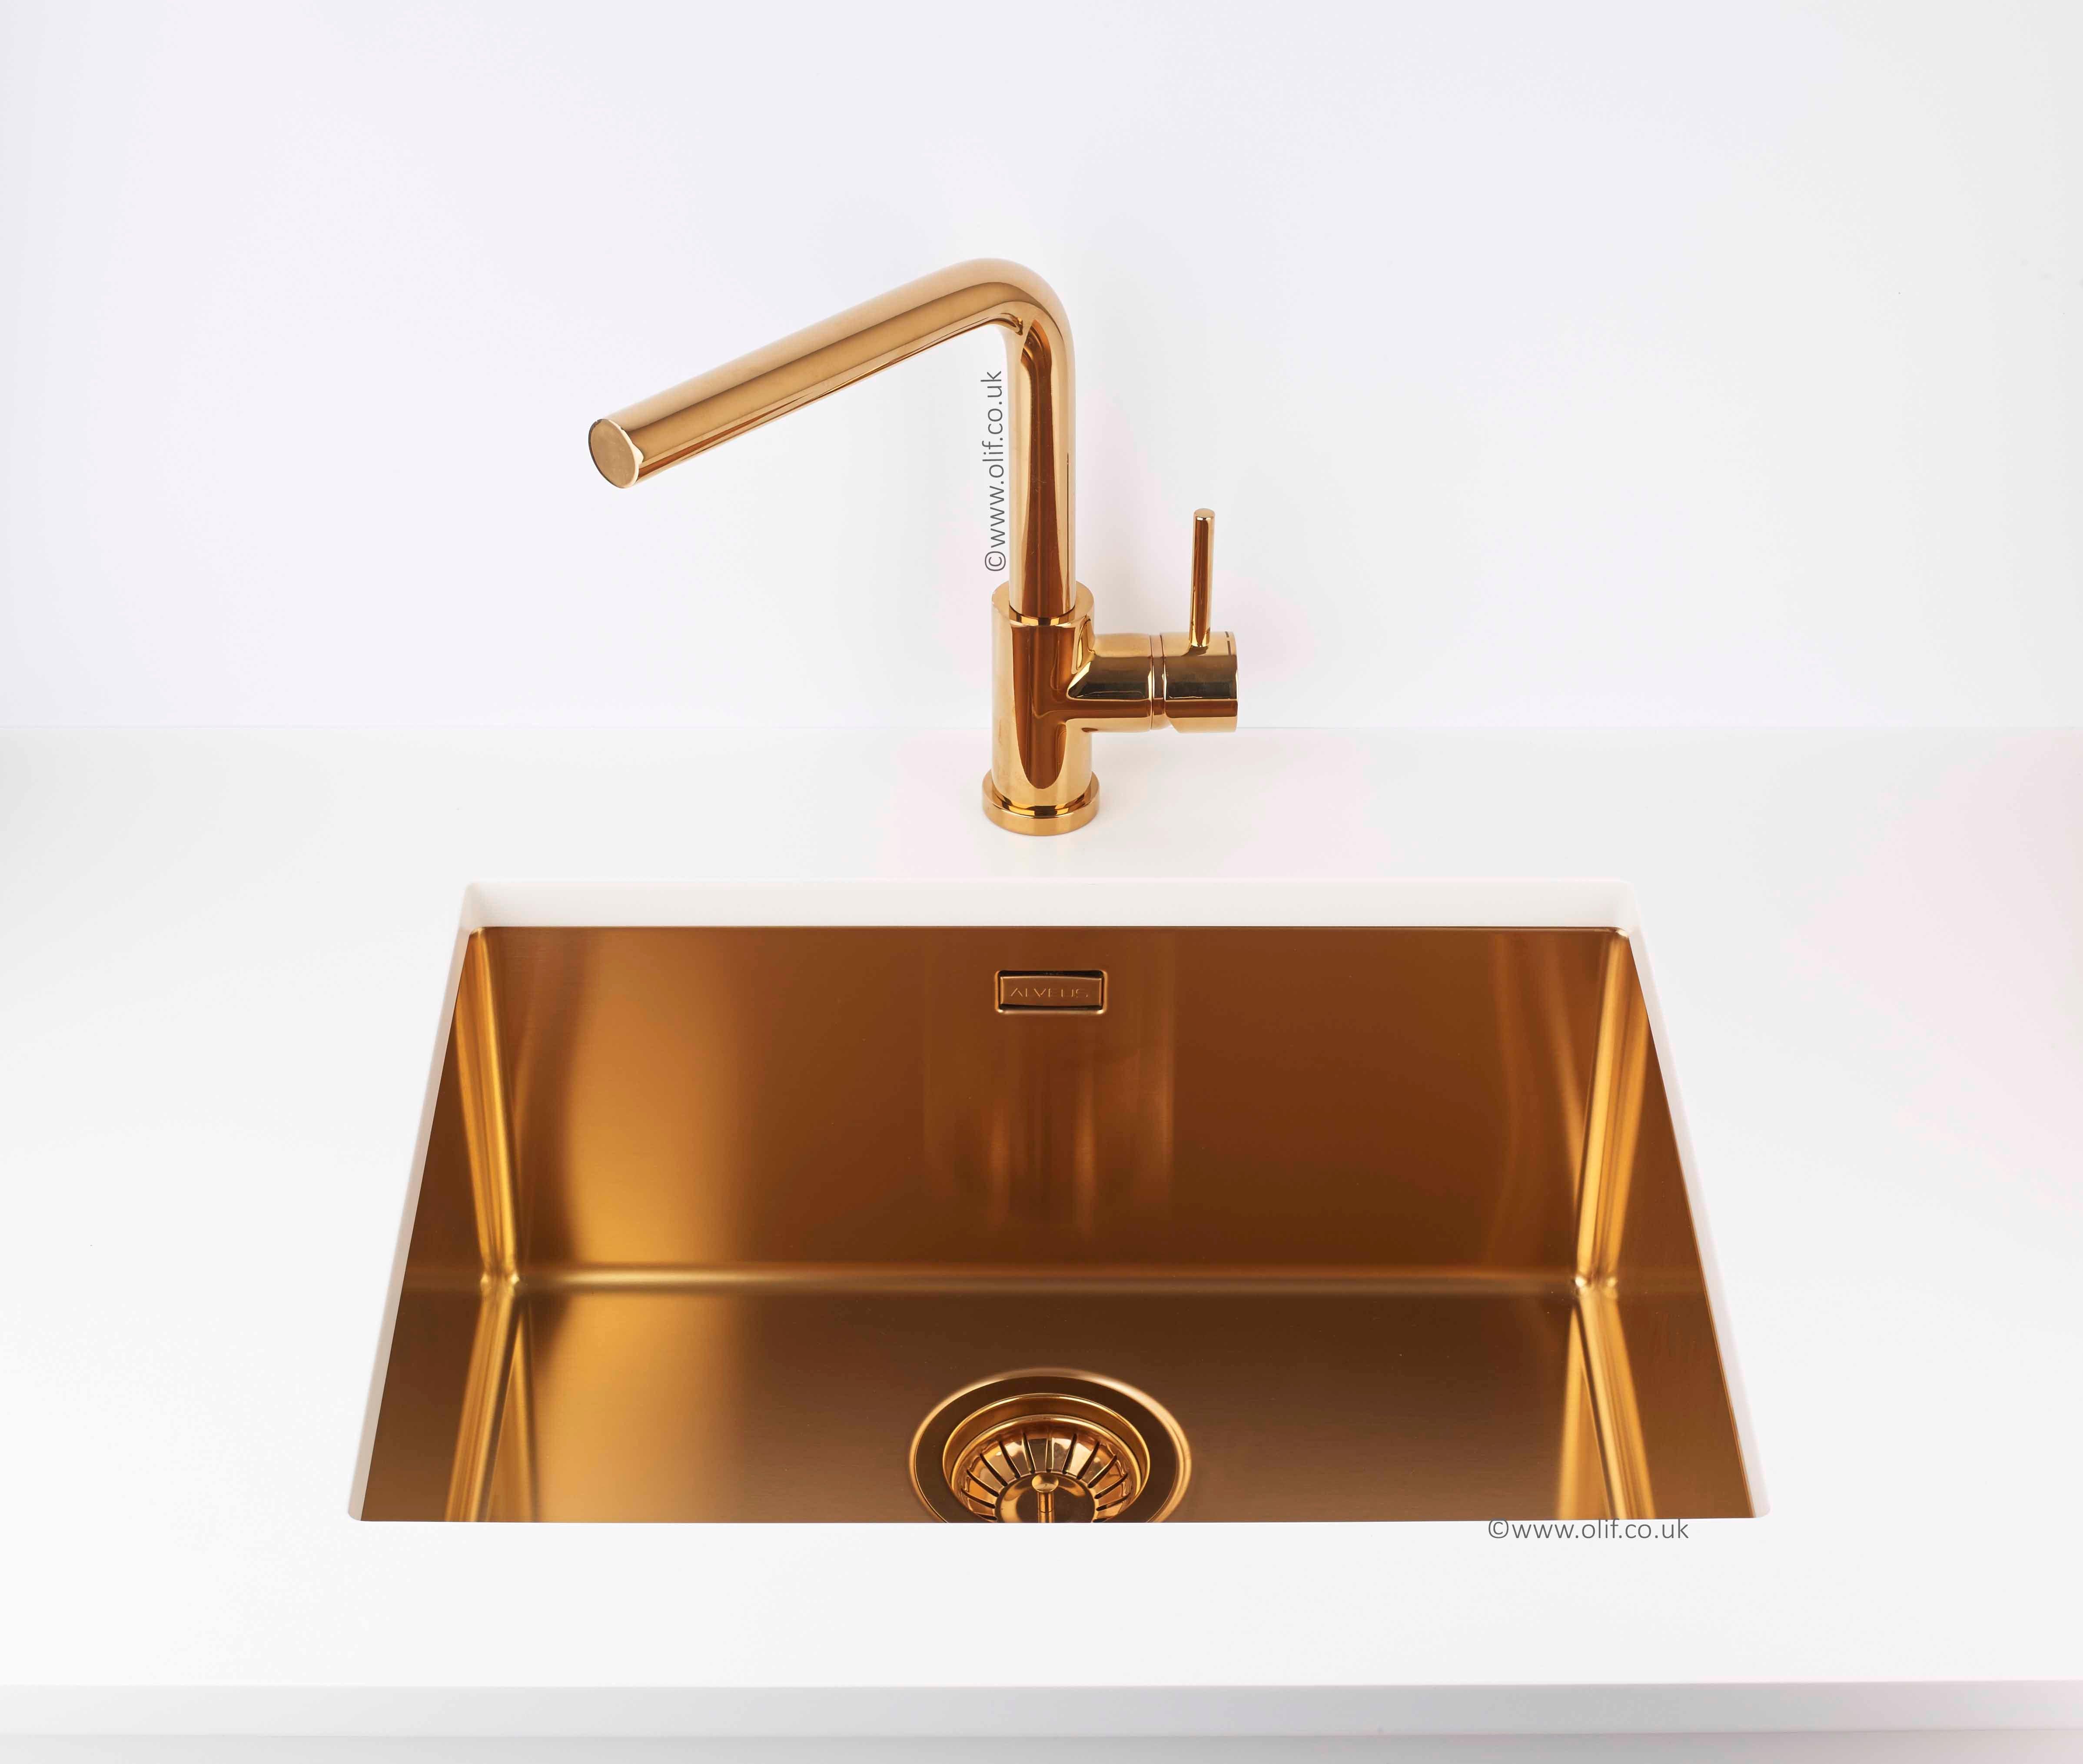 Pack of Alveus Monarch Kombino 50 Copper sink and matching Copper tap - Olif